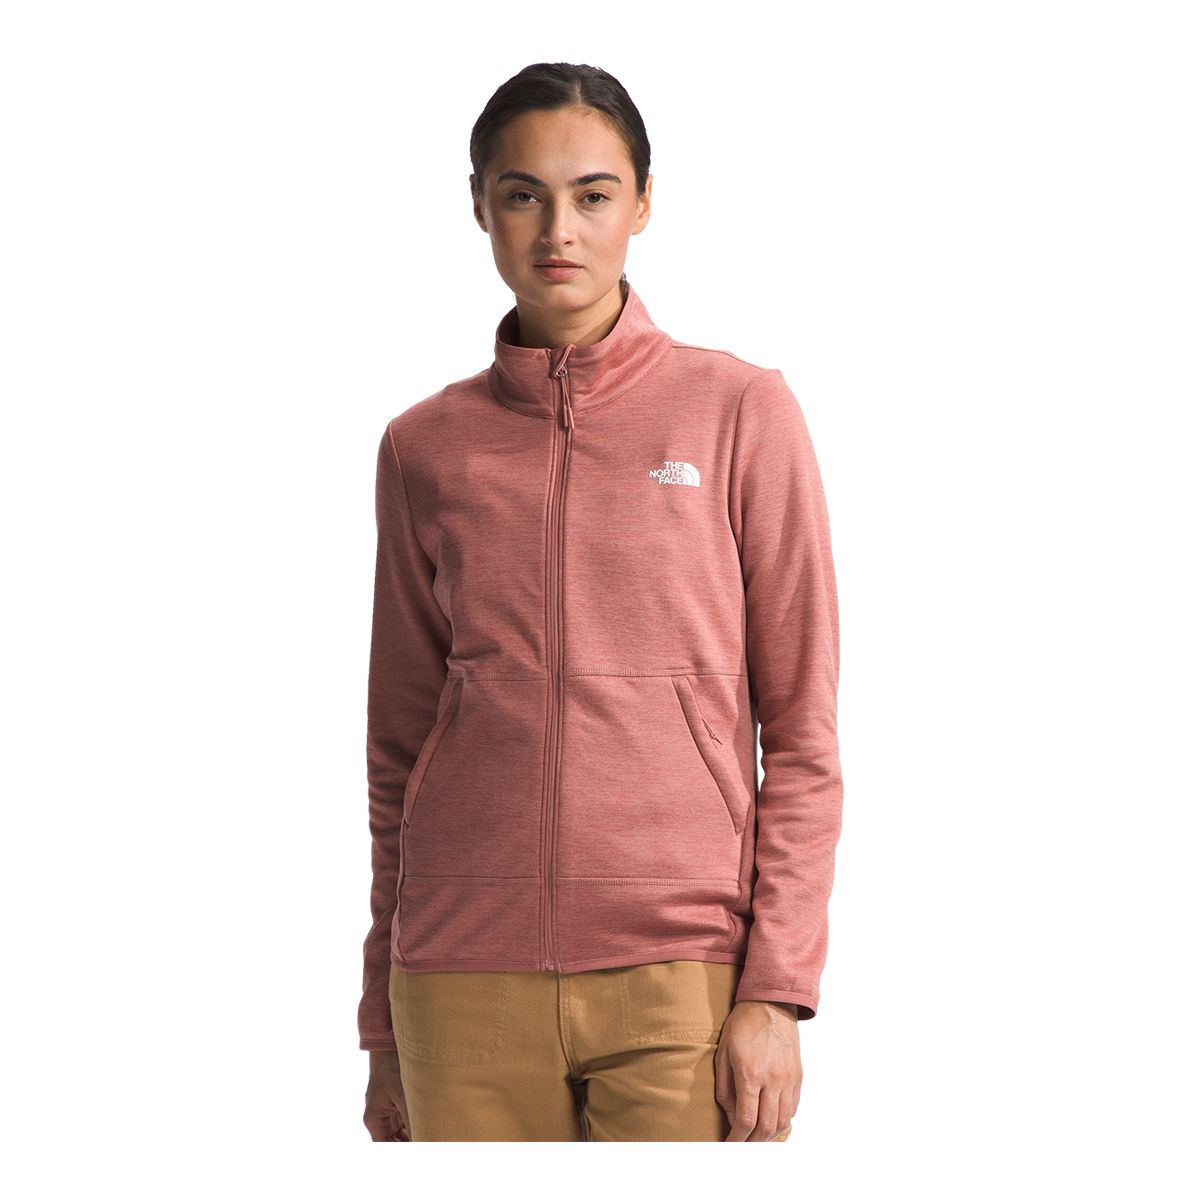 Image of The North Face Women's Canyonlands Full Zip